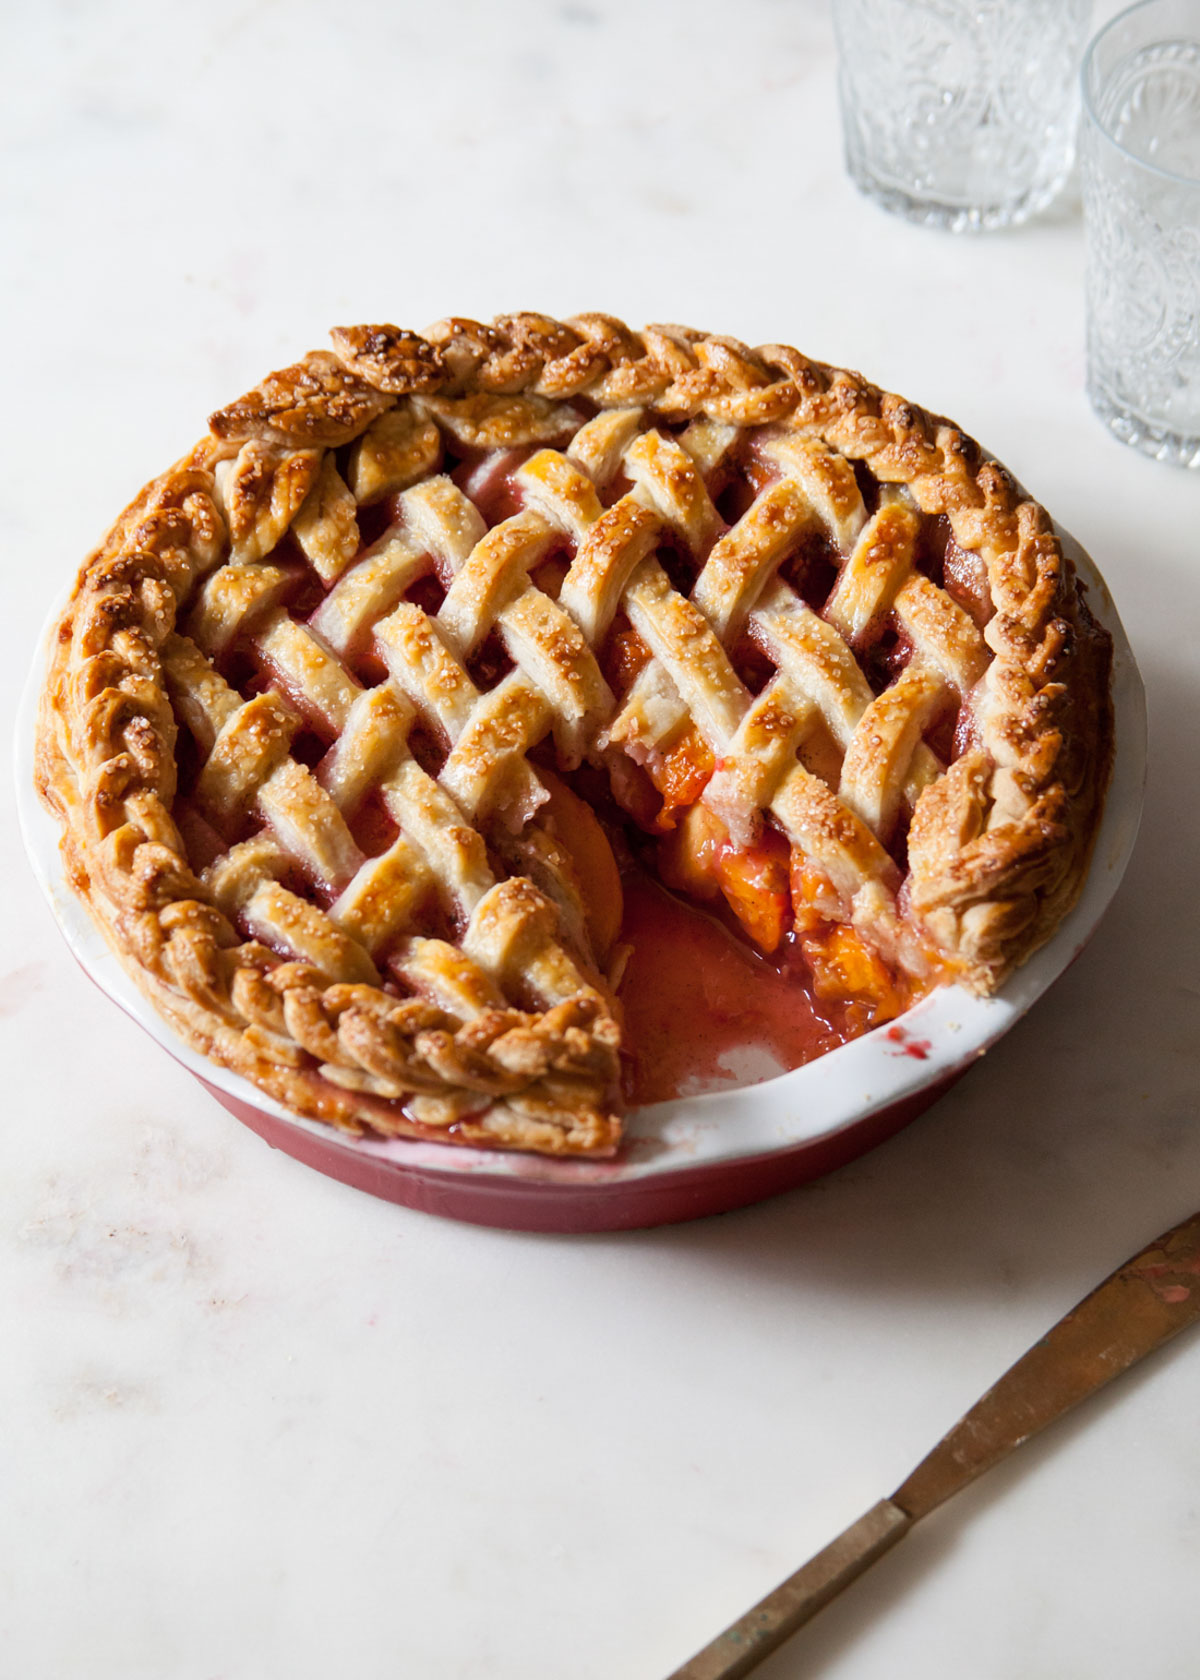 An apricot pie with raspberries and a lattice crust that has been sliced open.